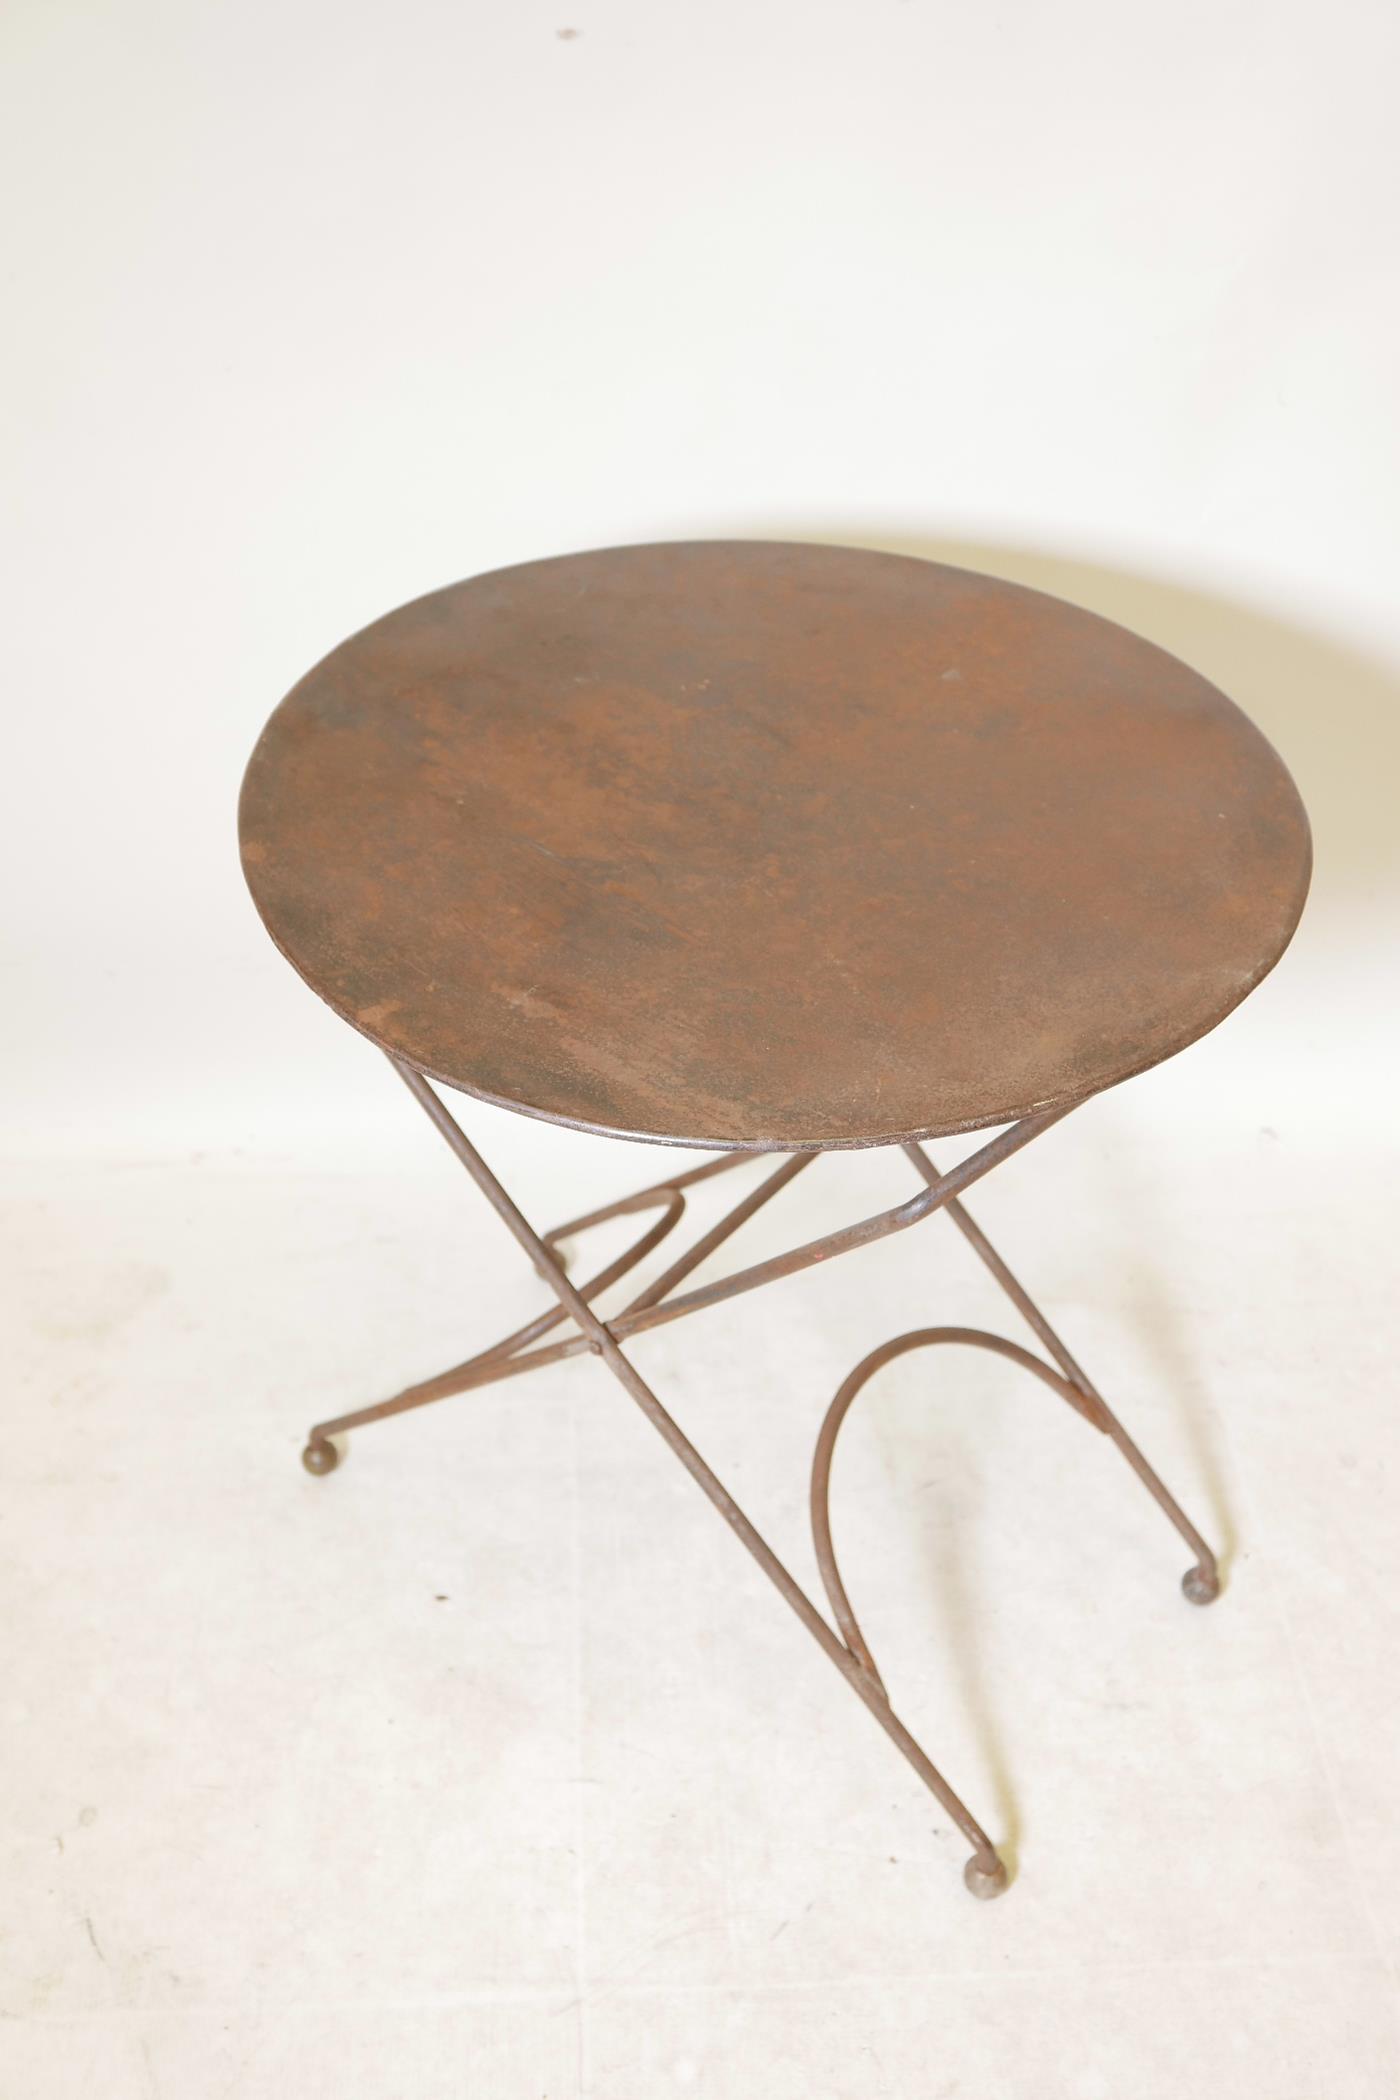 A French wrought metal folding cafe table, 23½" diameter - Image 2 of 2